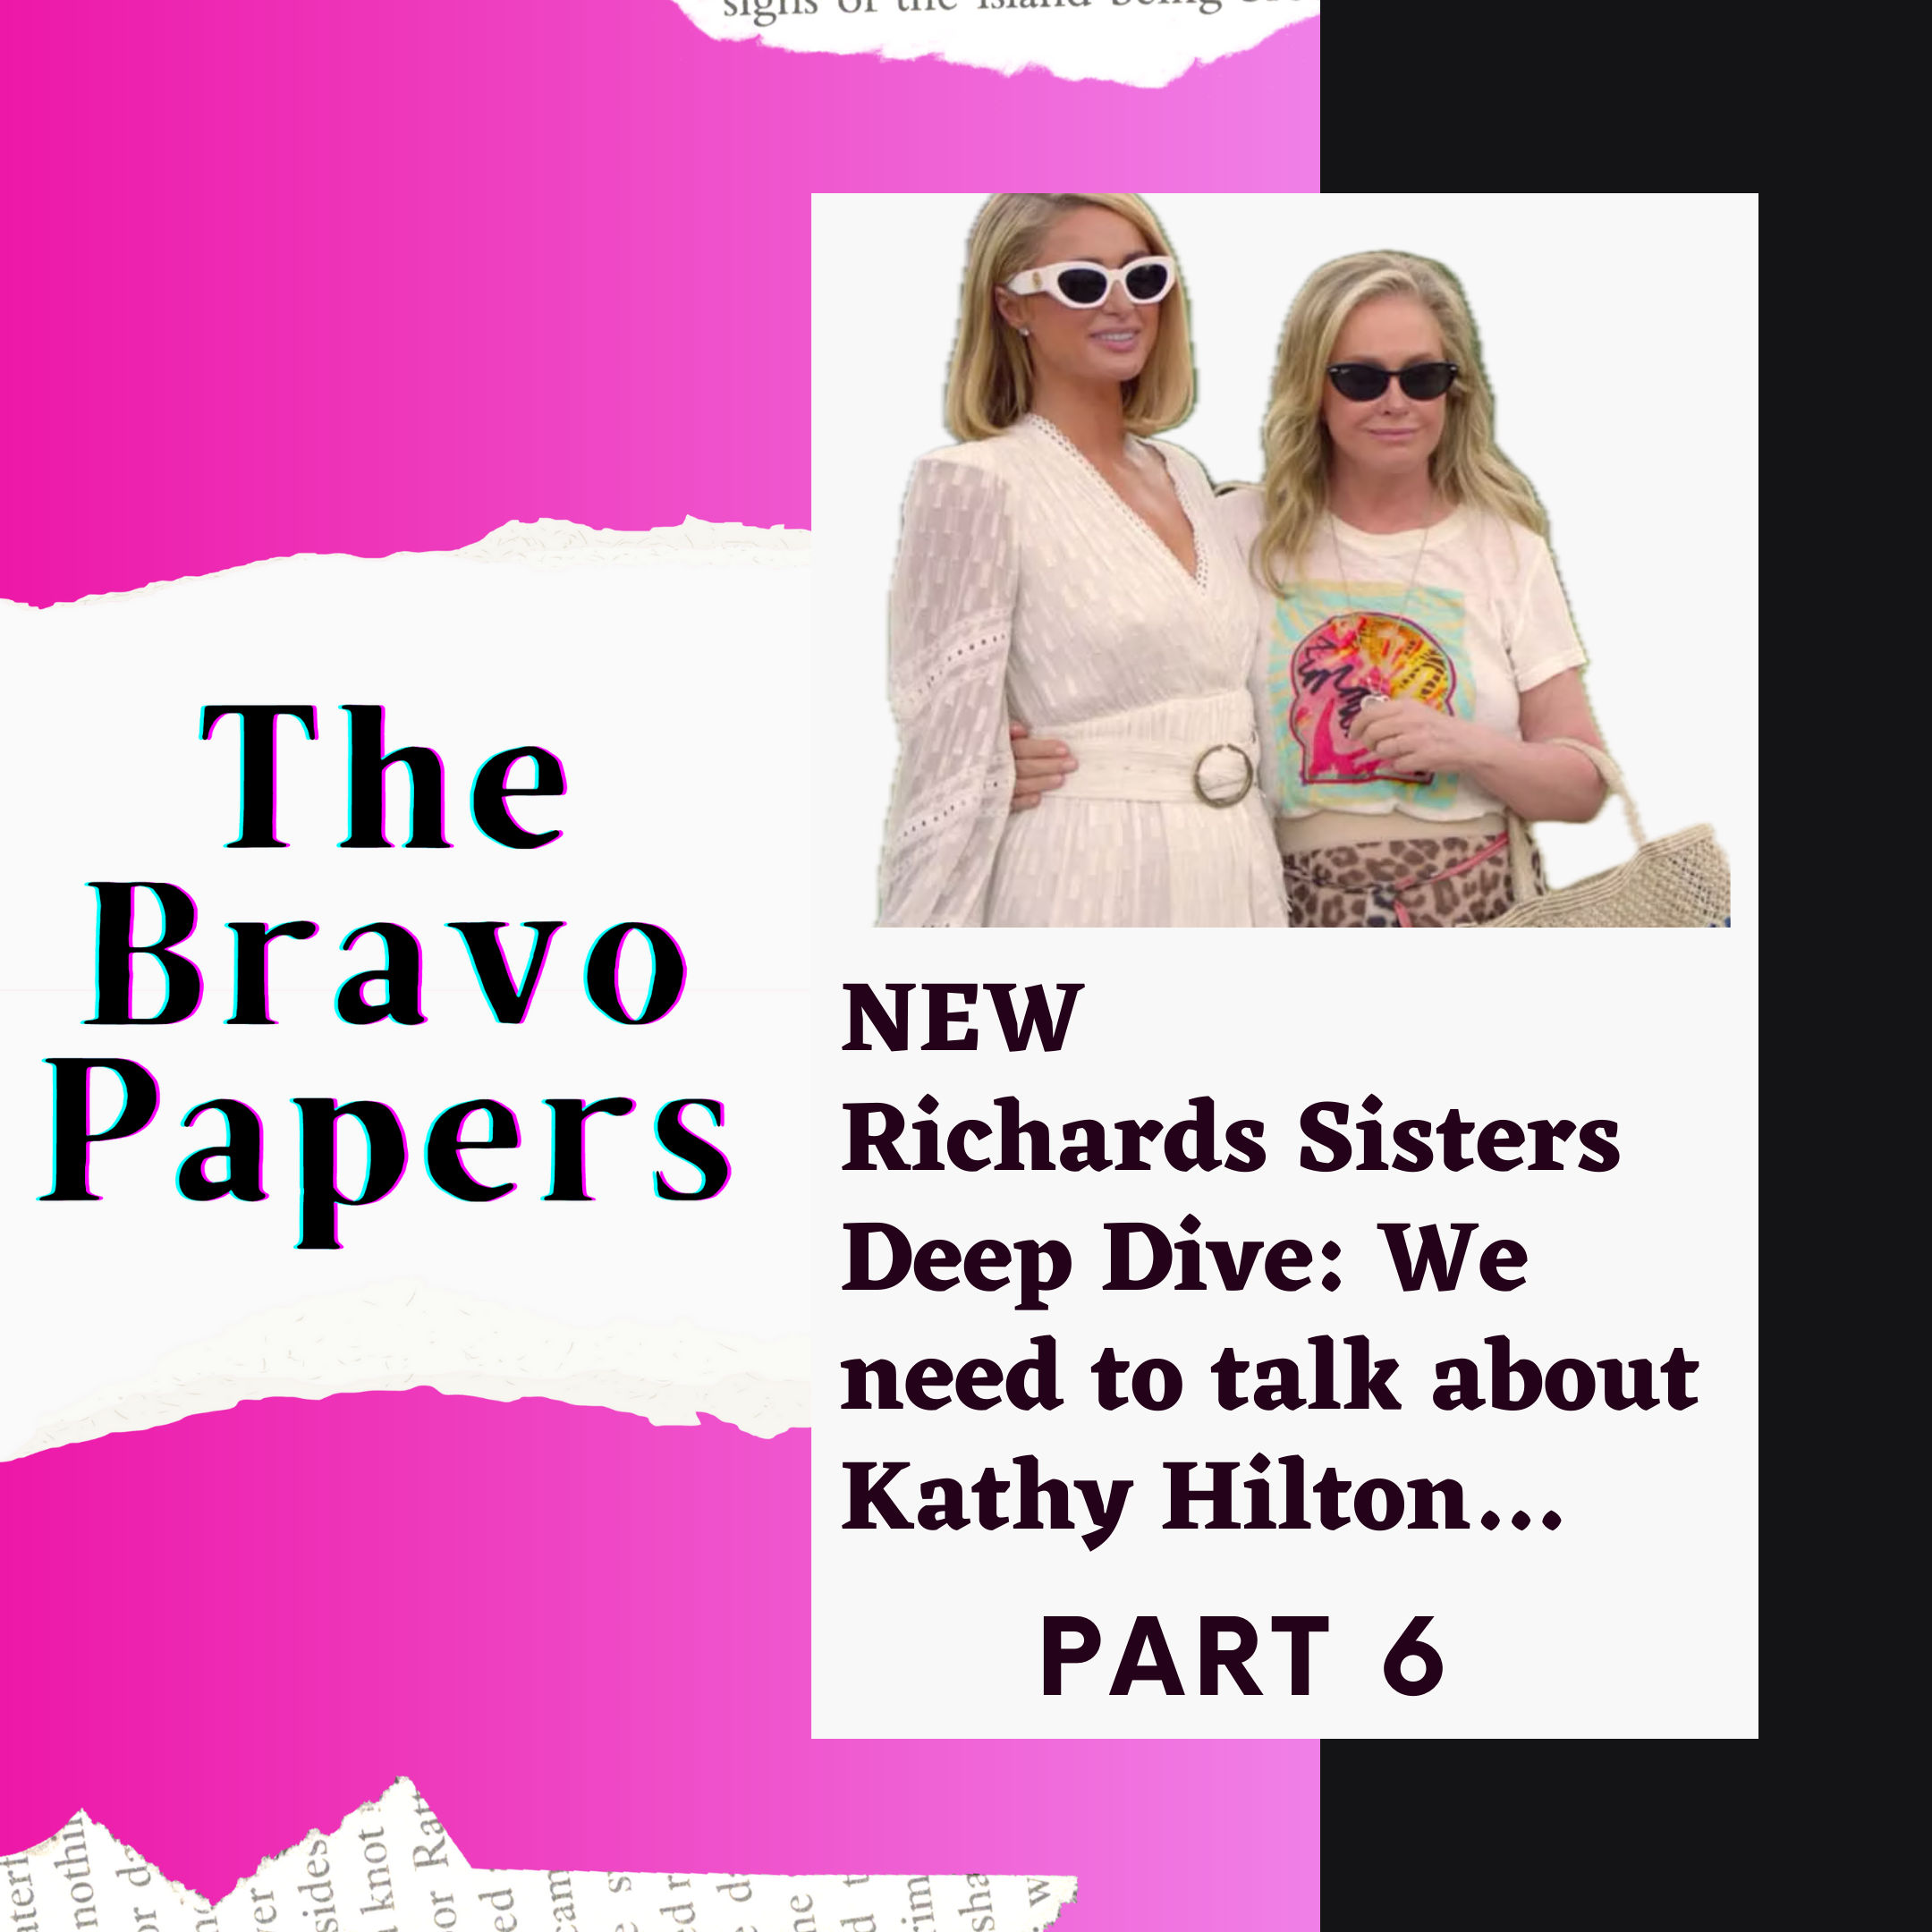 Bravo Paper: Richards Sisters Deep Dive Part 6 - We need to talk about Kathy Hilton...